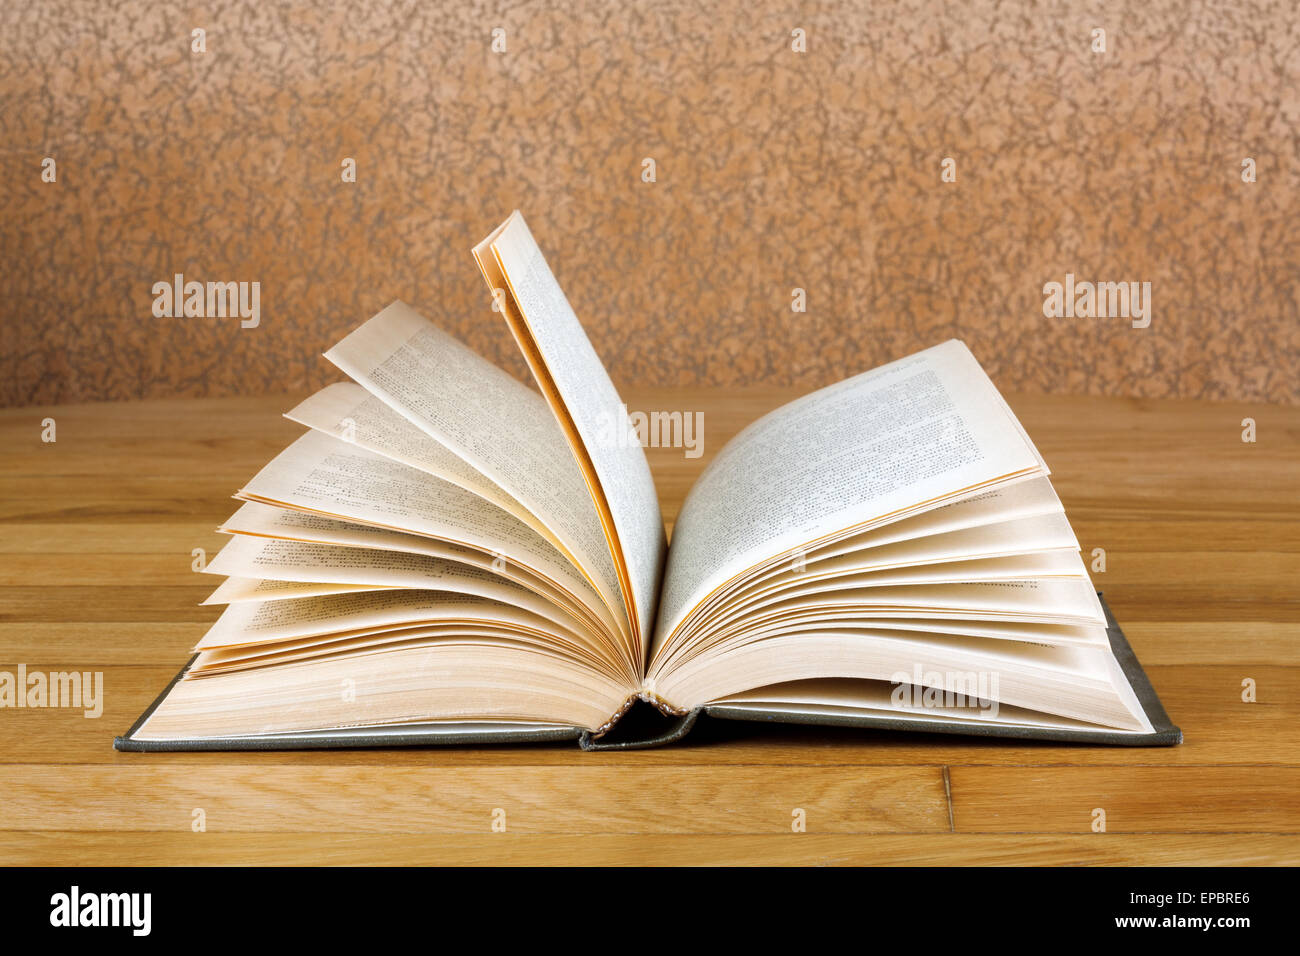 Old open book on grunge wooden table Stock Photo